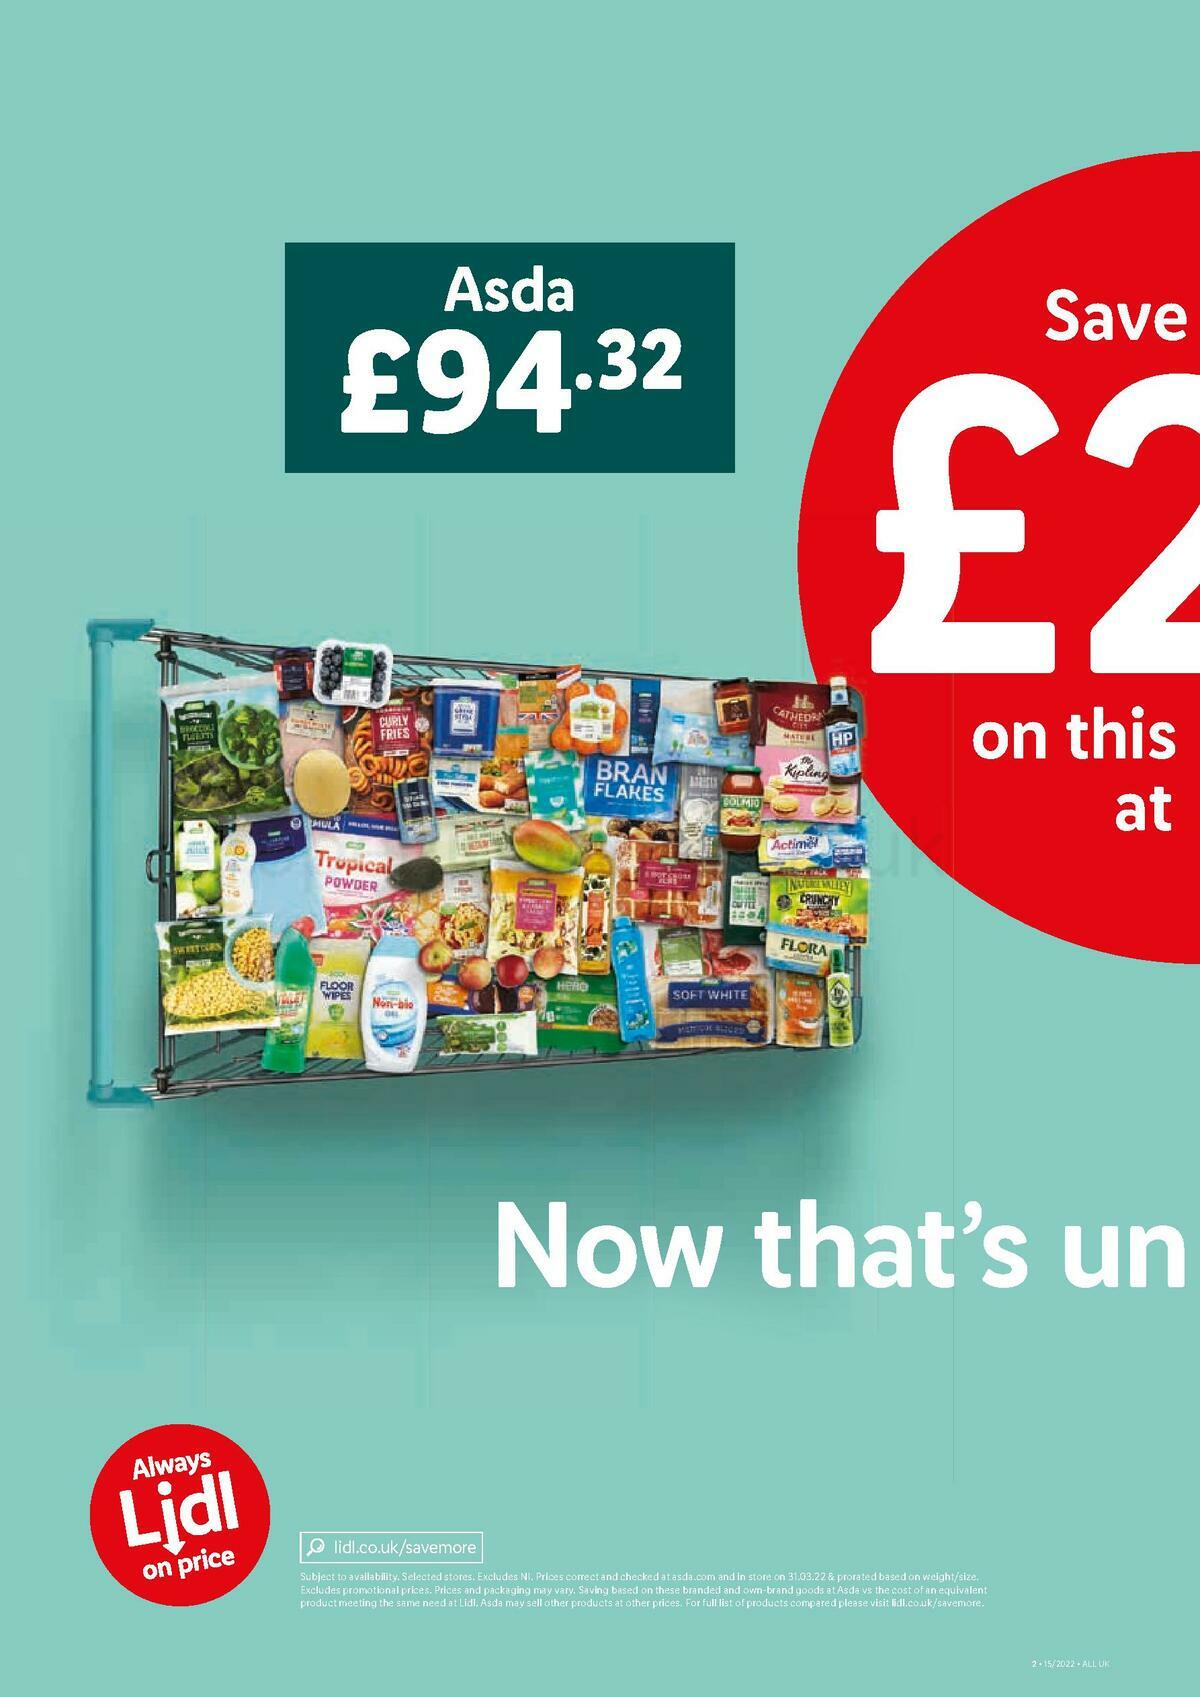 LIDL Offers from 14 April